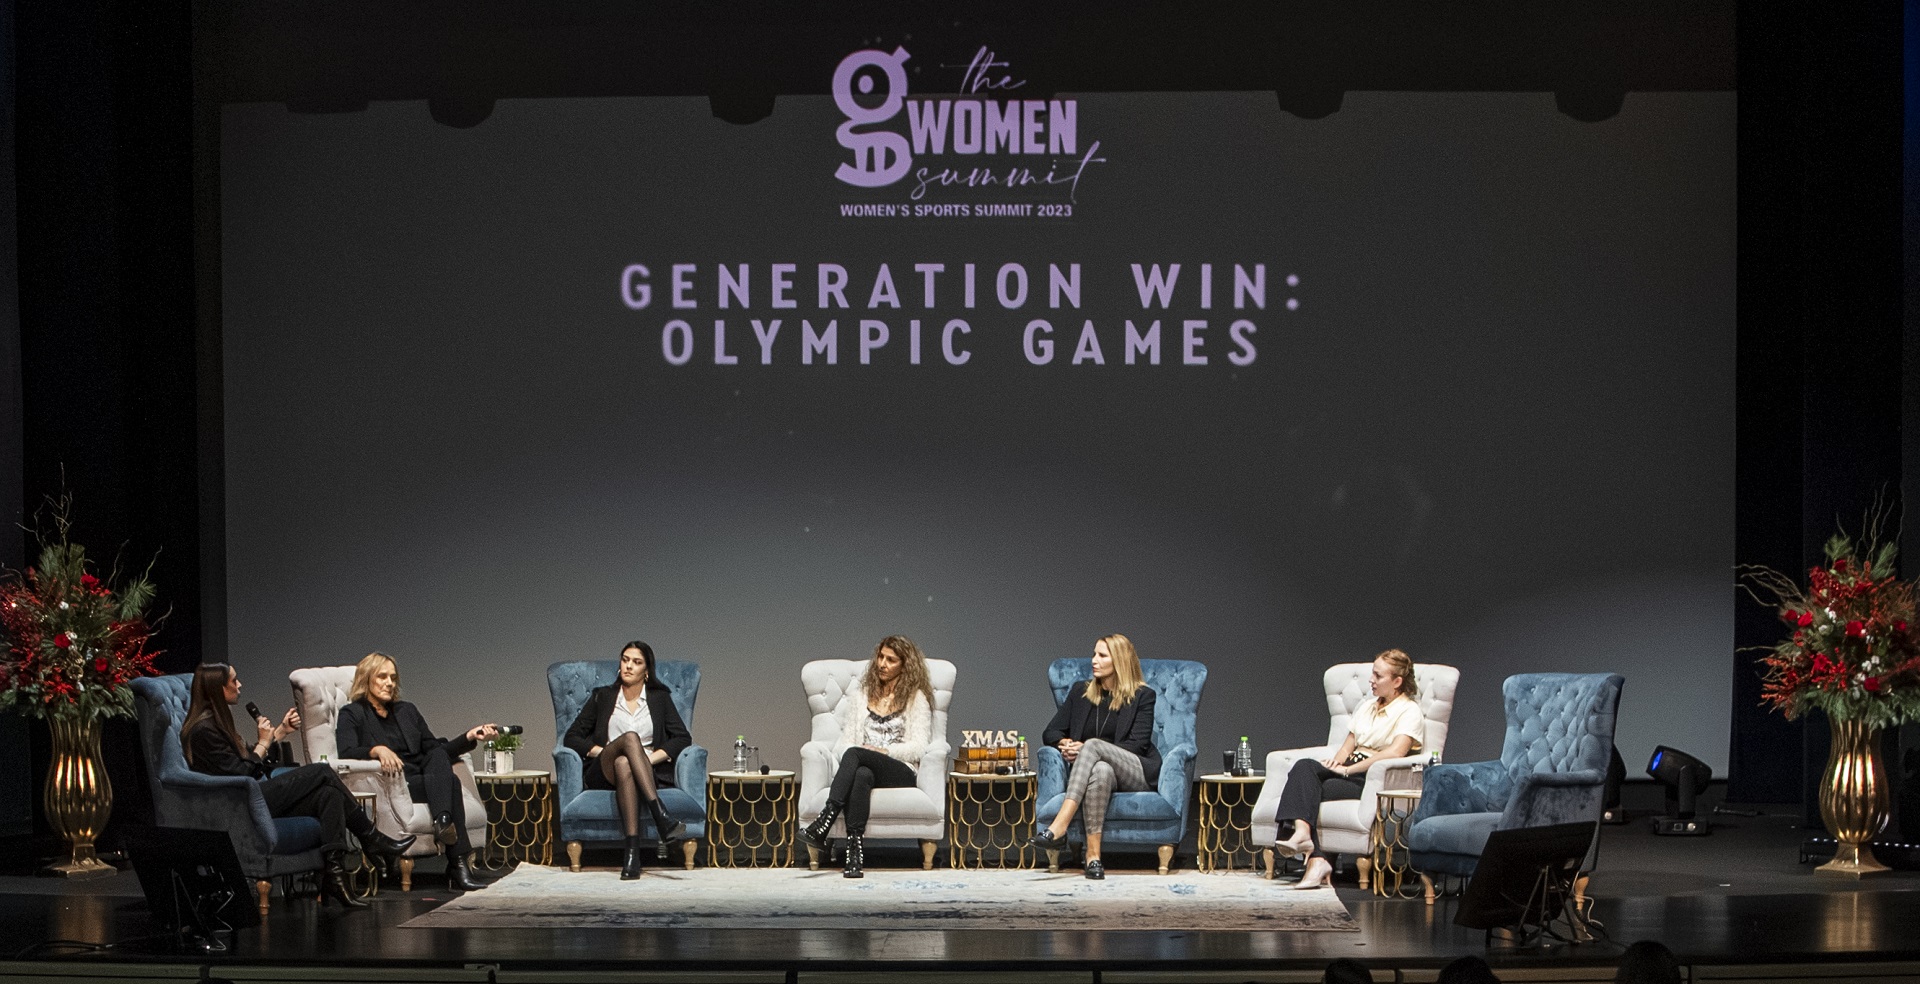  generation win olympic games